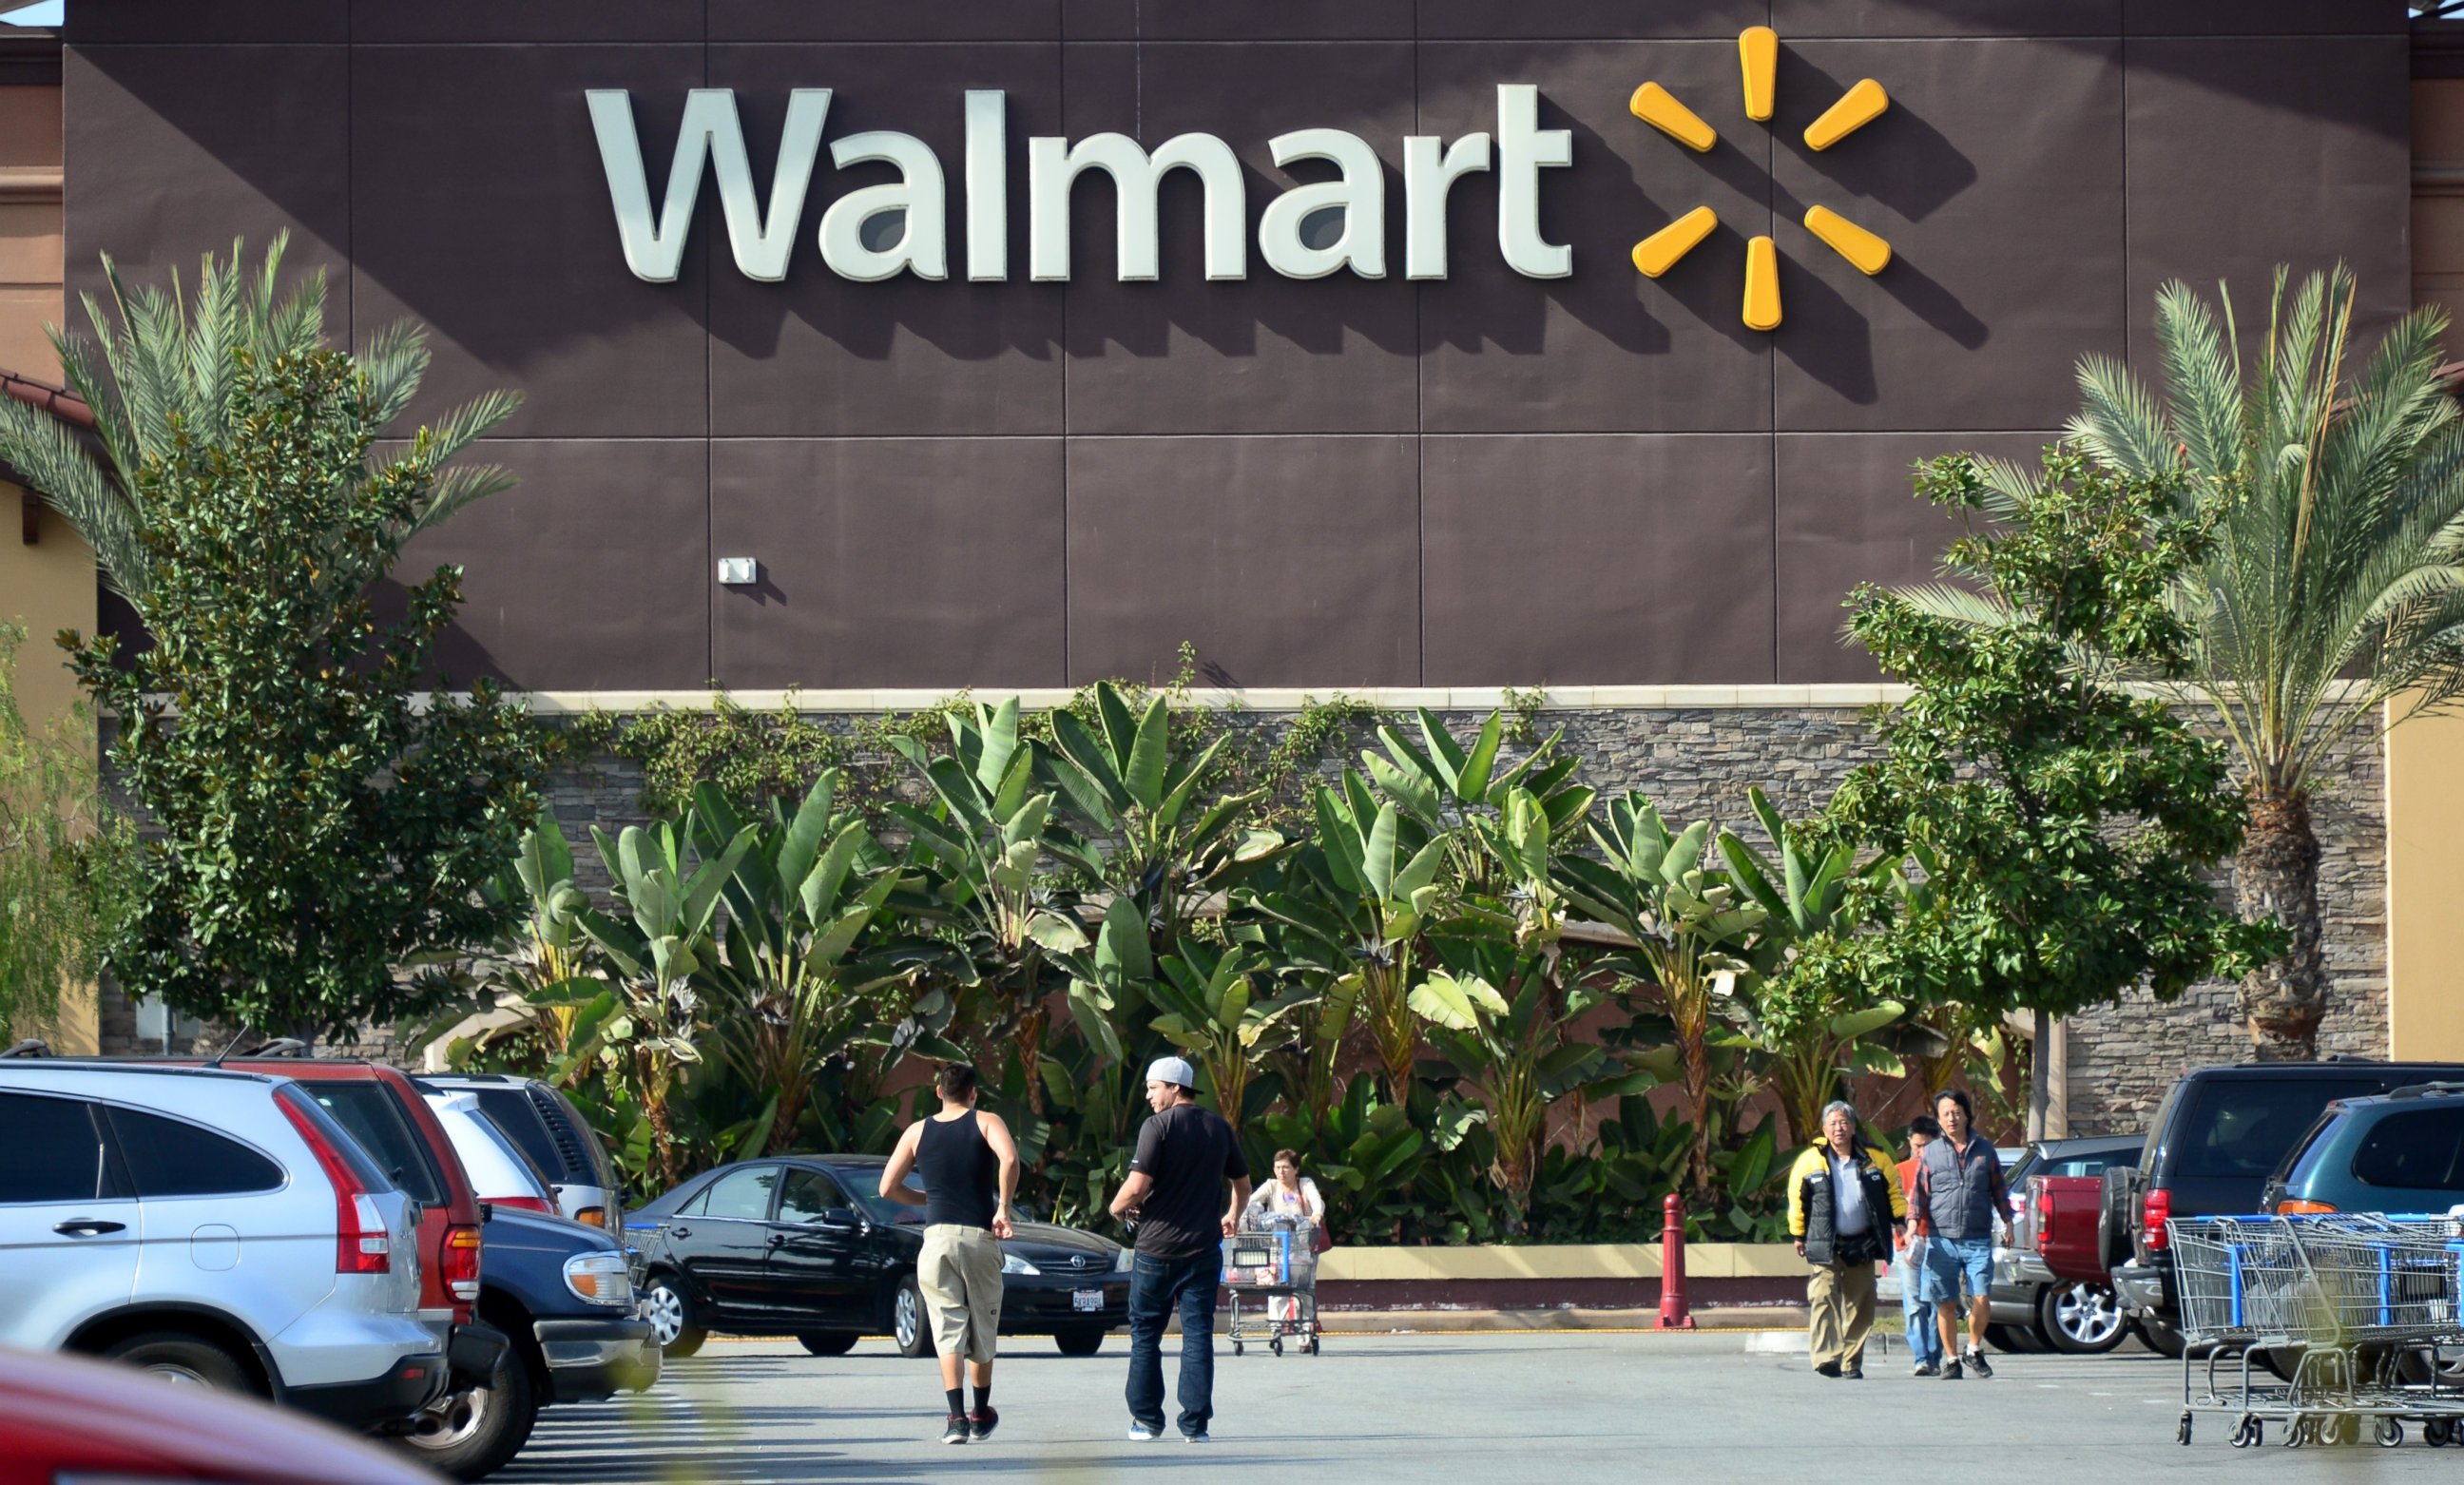 PHOTO: Shoppers are seen outside a Walmart store in Rosemead, Calif. on January 29, 2014.